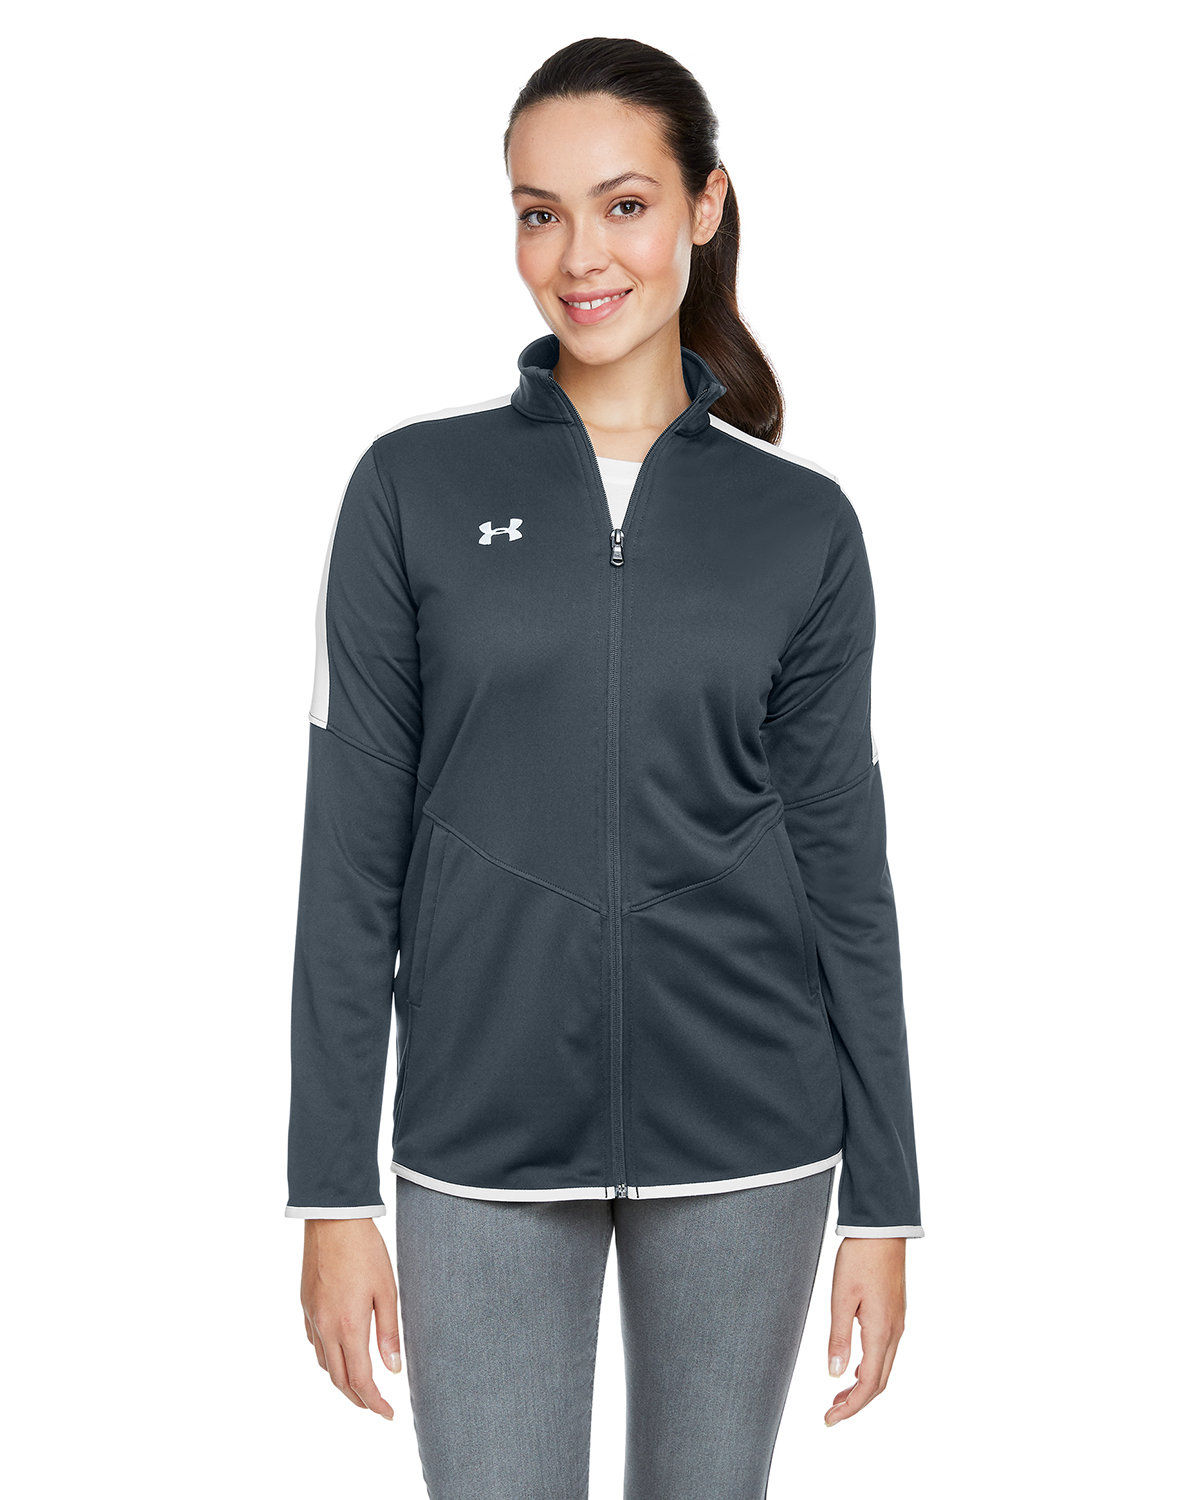 E179353 Under Armour Ladies' Rival Knit Jacket 1326774